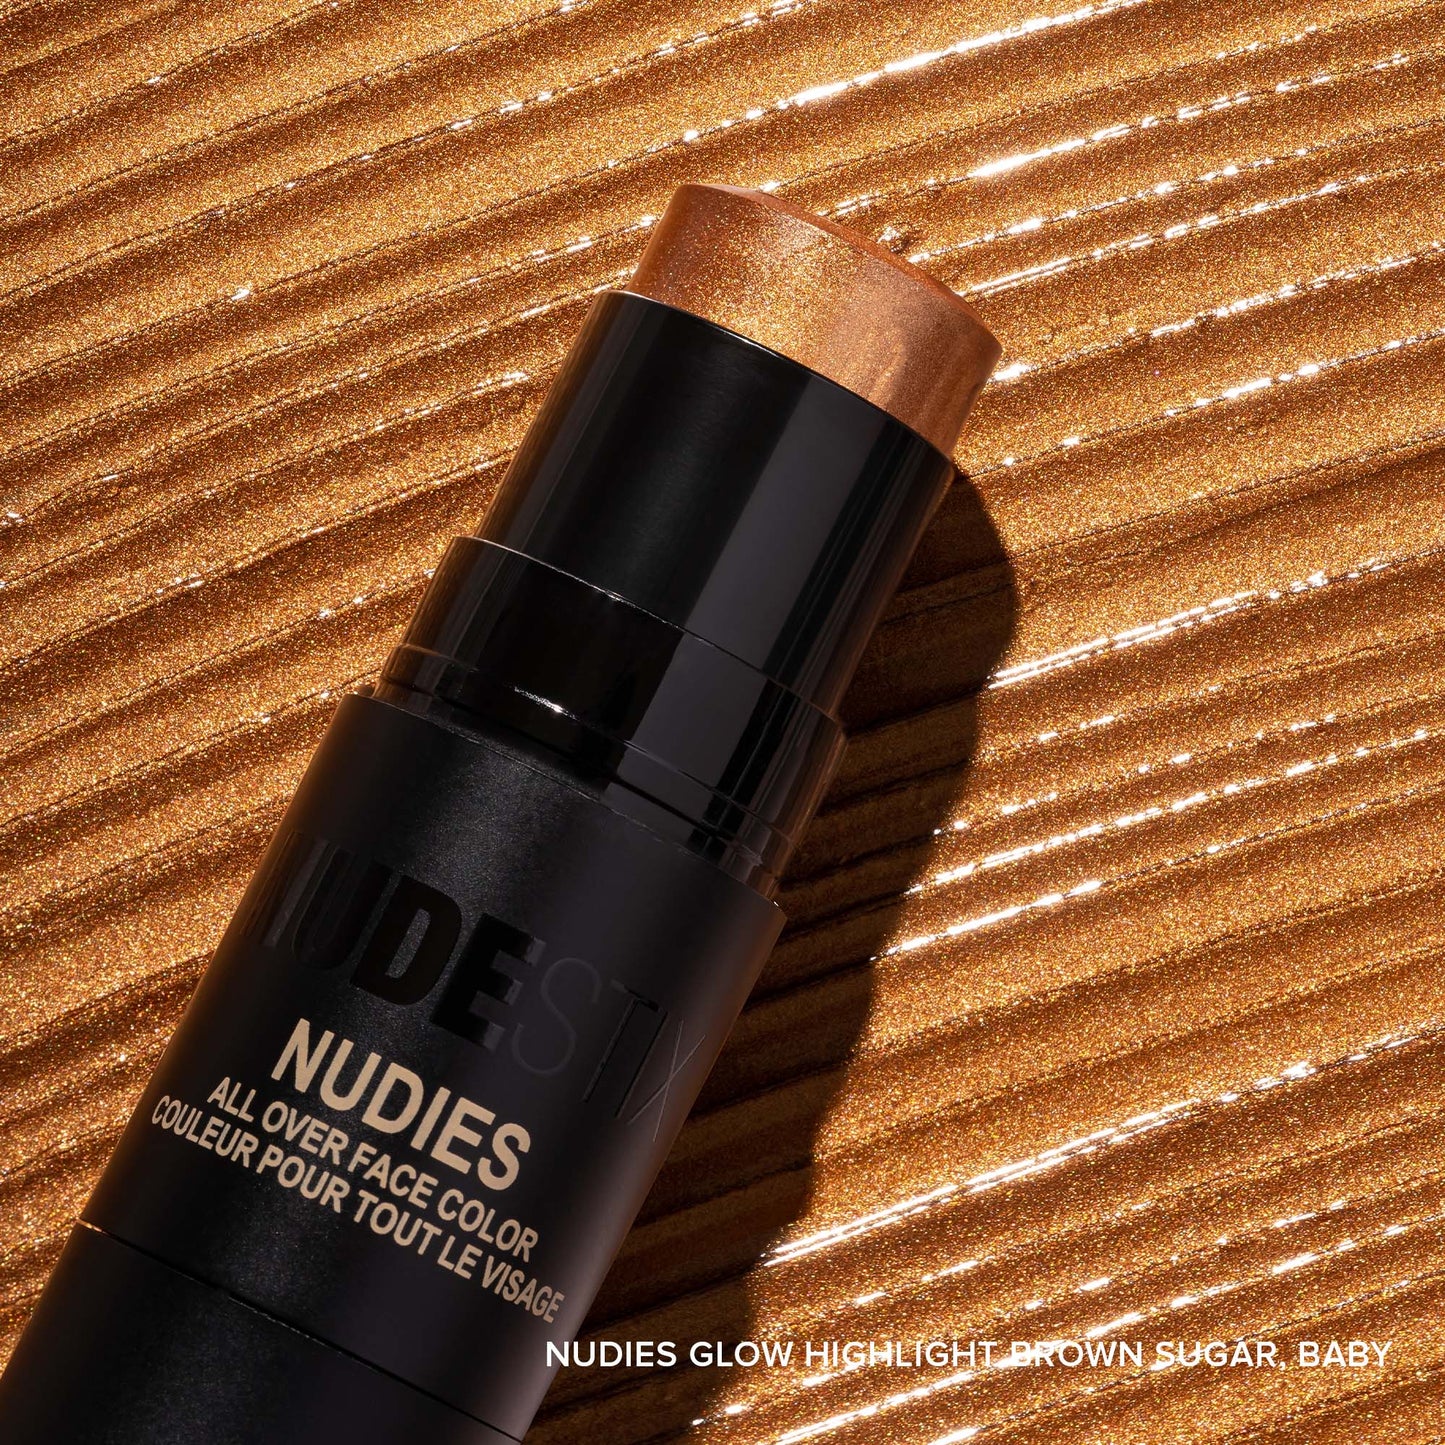 Nudies Glow highlighter in shade Brown Sugar Baby with texture swatch